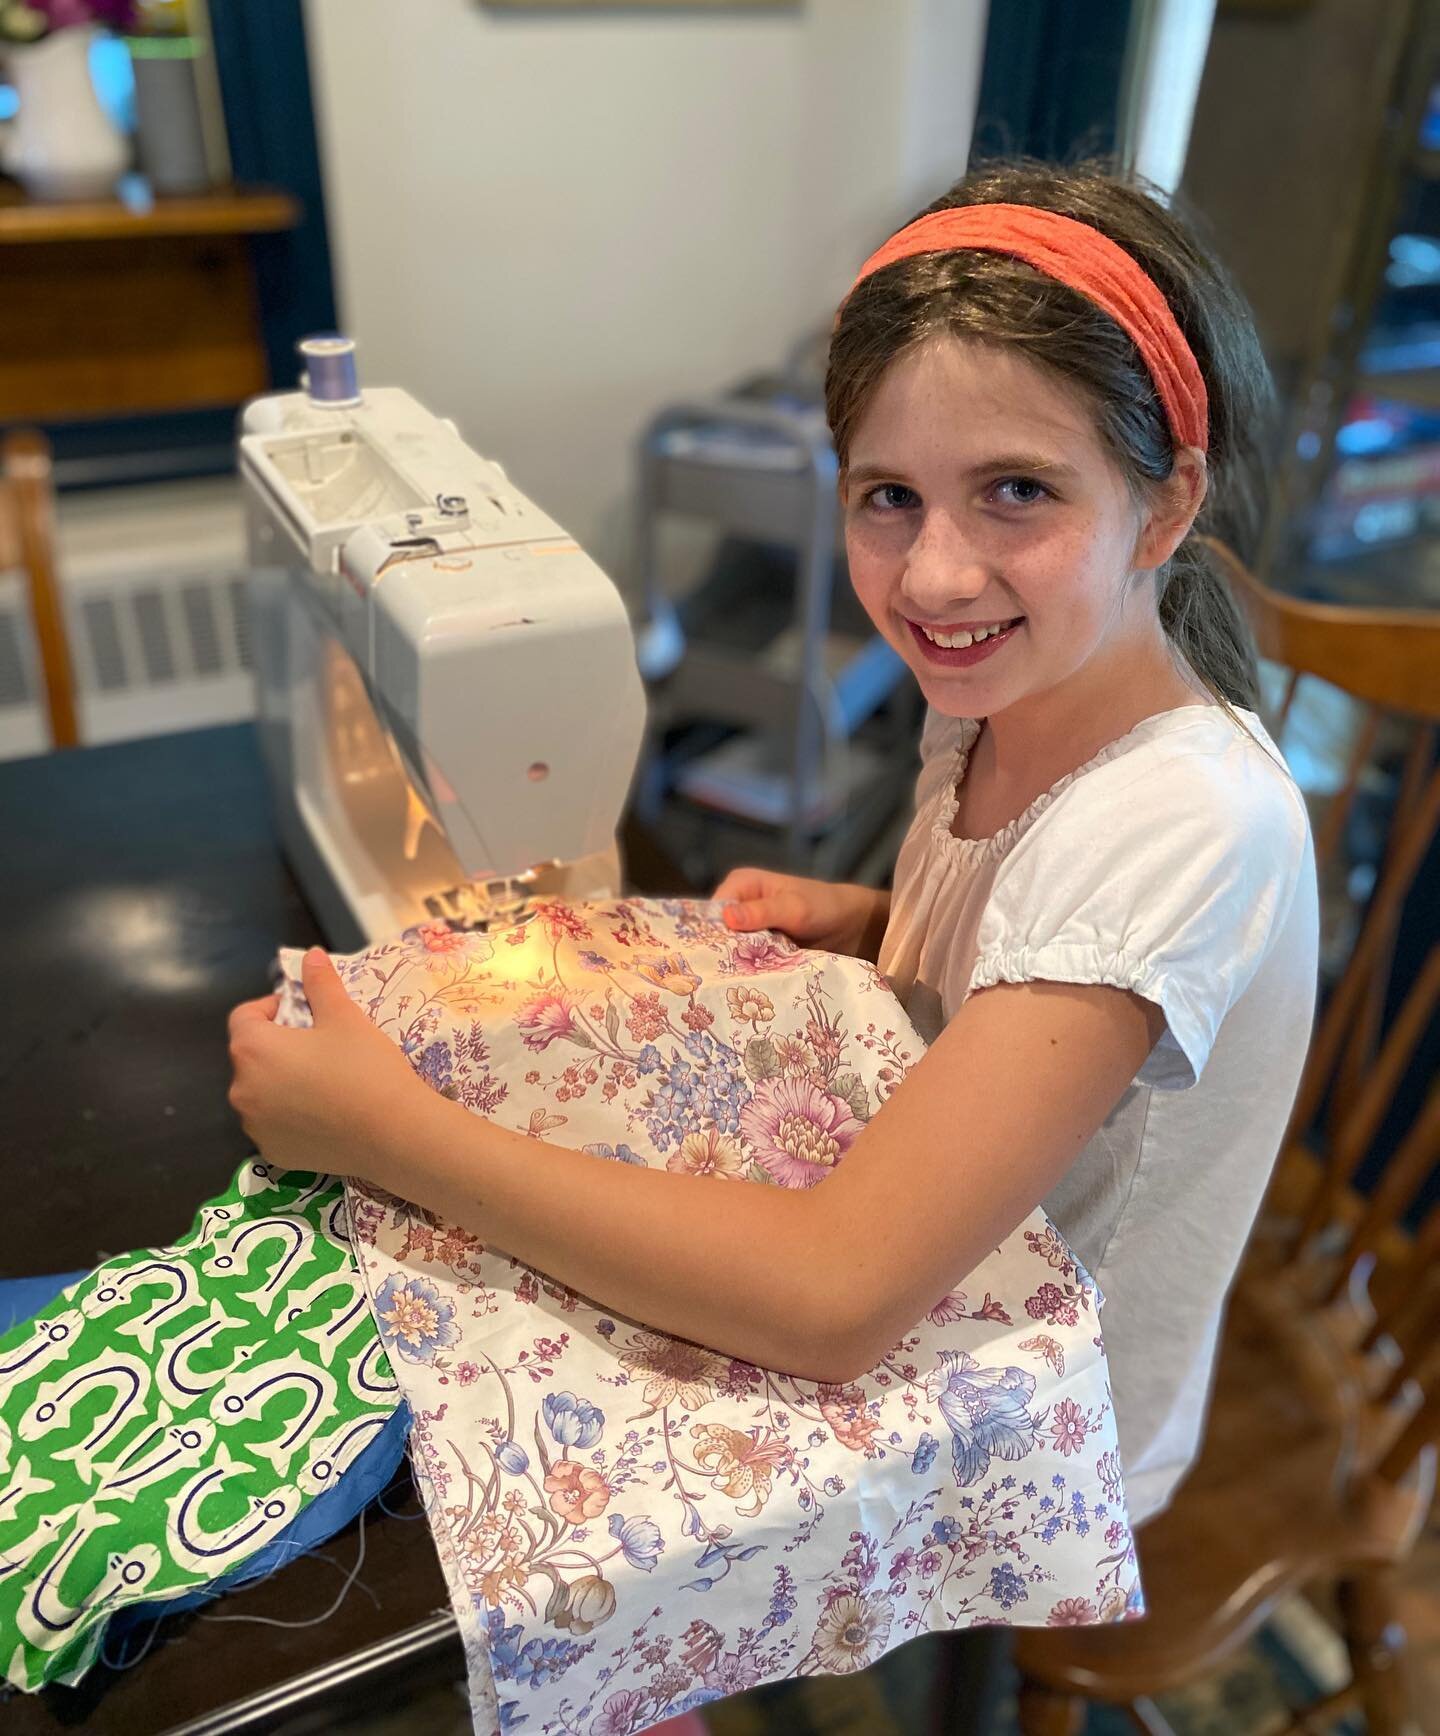 I may not have &ldquo;self-actualized&rdquo; during quarantine, but my daughter is doing her best to do so. She made the most perfect muffins ever from scratch yesterday. Now she&rsquo;s learning how to work with this finicky beast. #homeeconomics #l